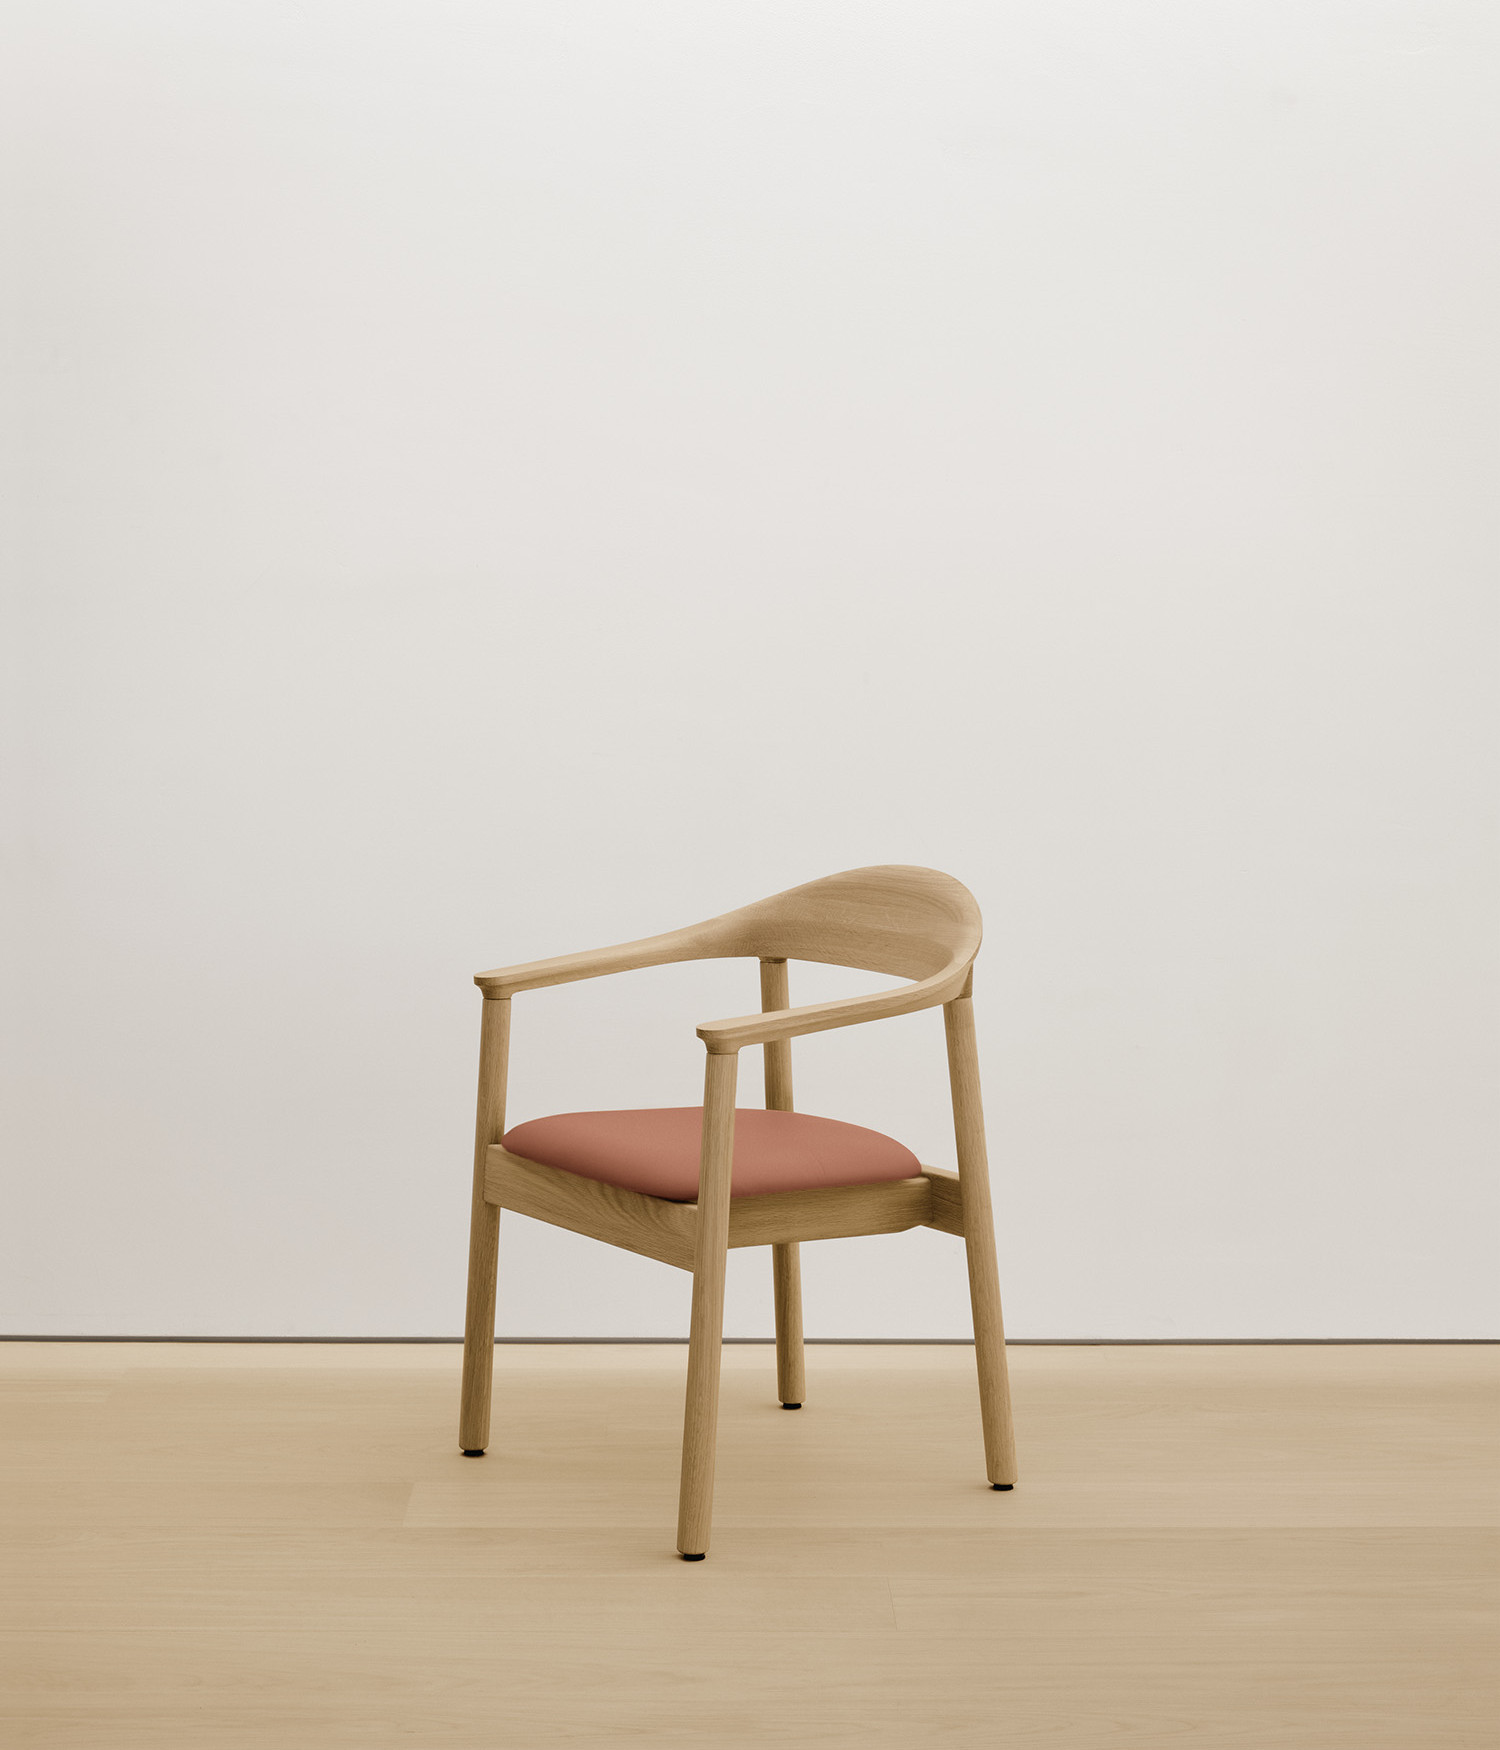  white-oak chair with  color upholstered seat  